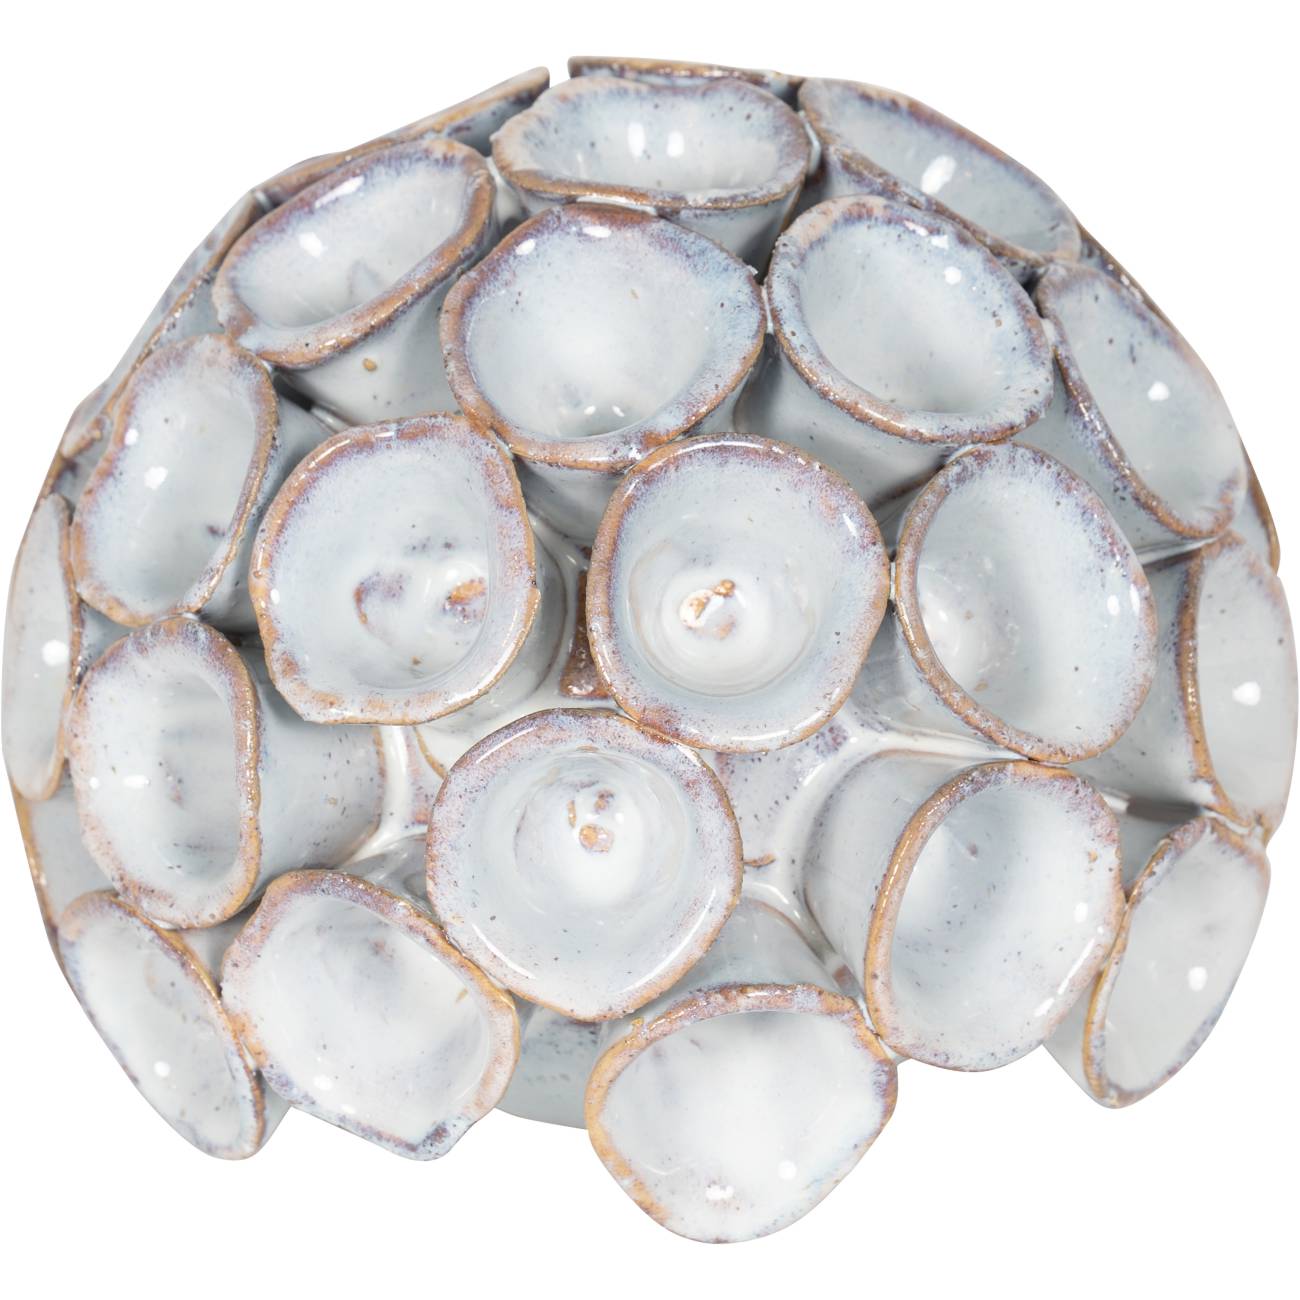 Aged White Ceramic Ornament - Vintage Elegance for Timeless Decor. Adds Character and Charm to Any Space